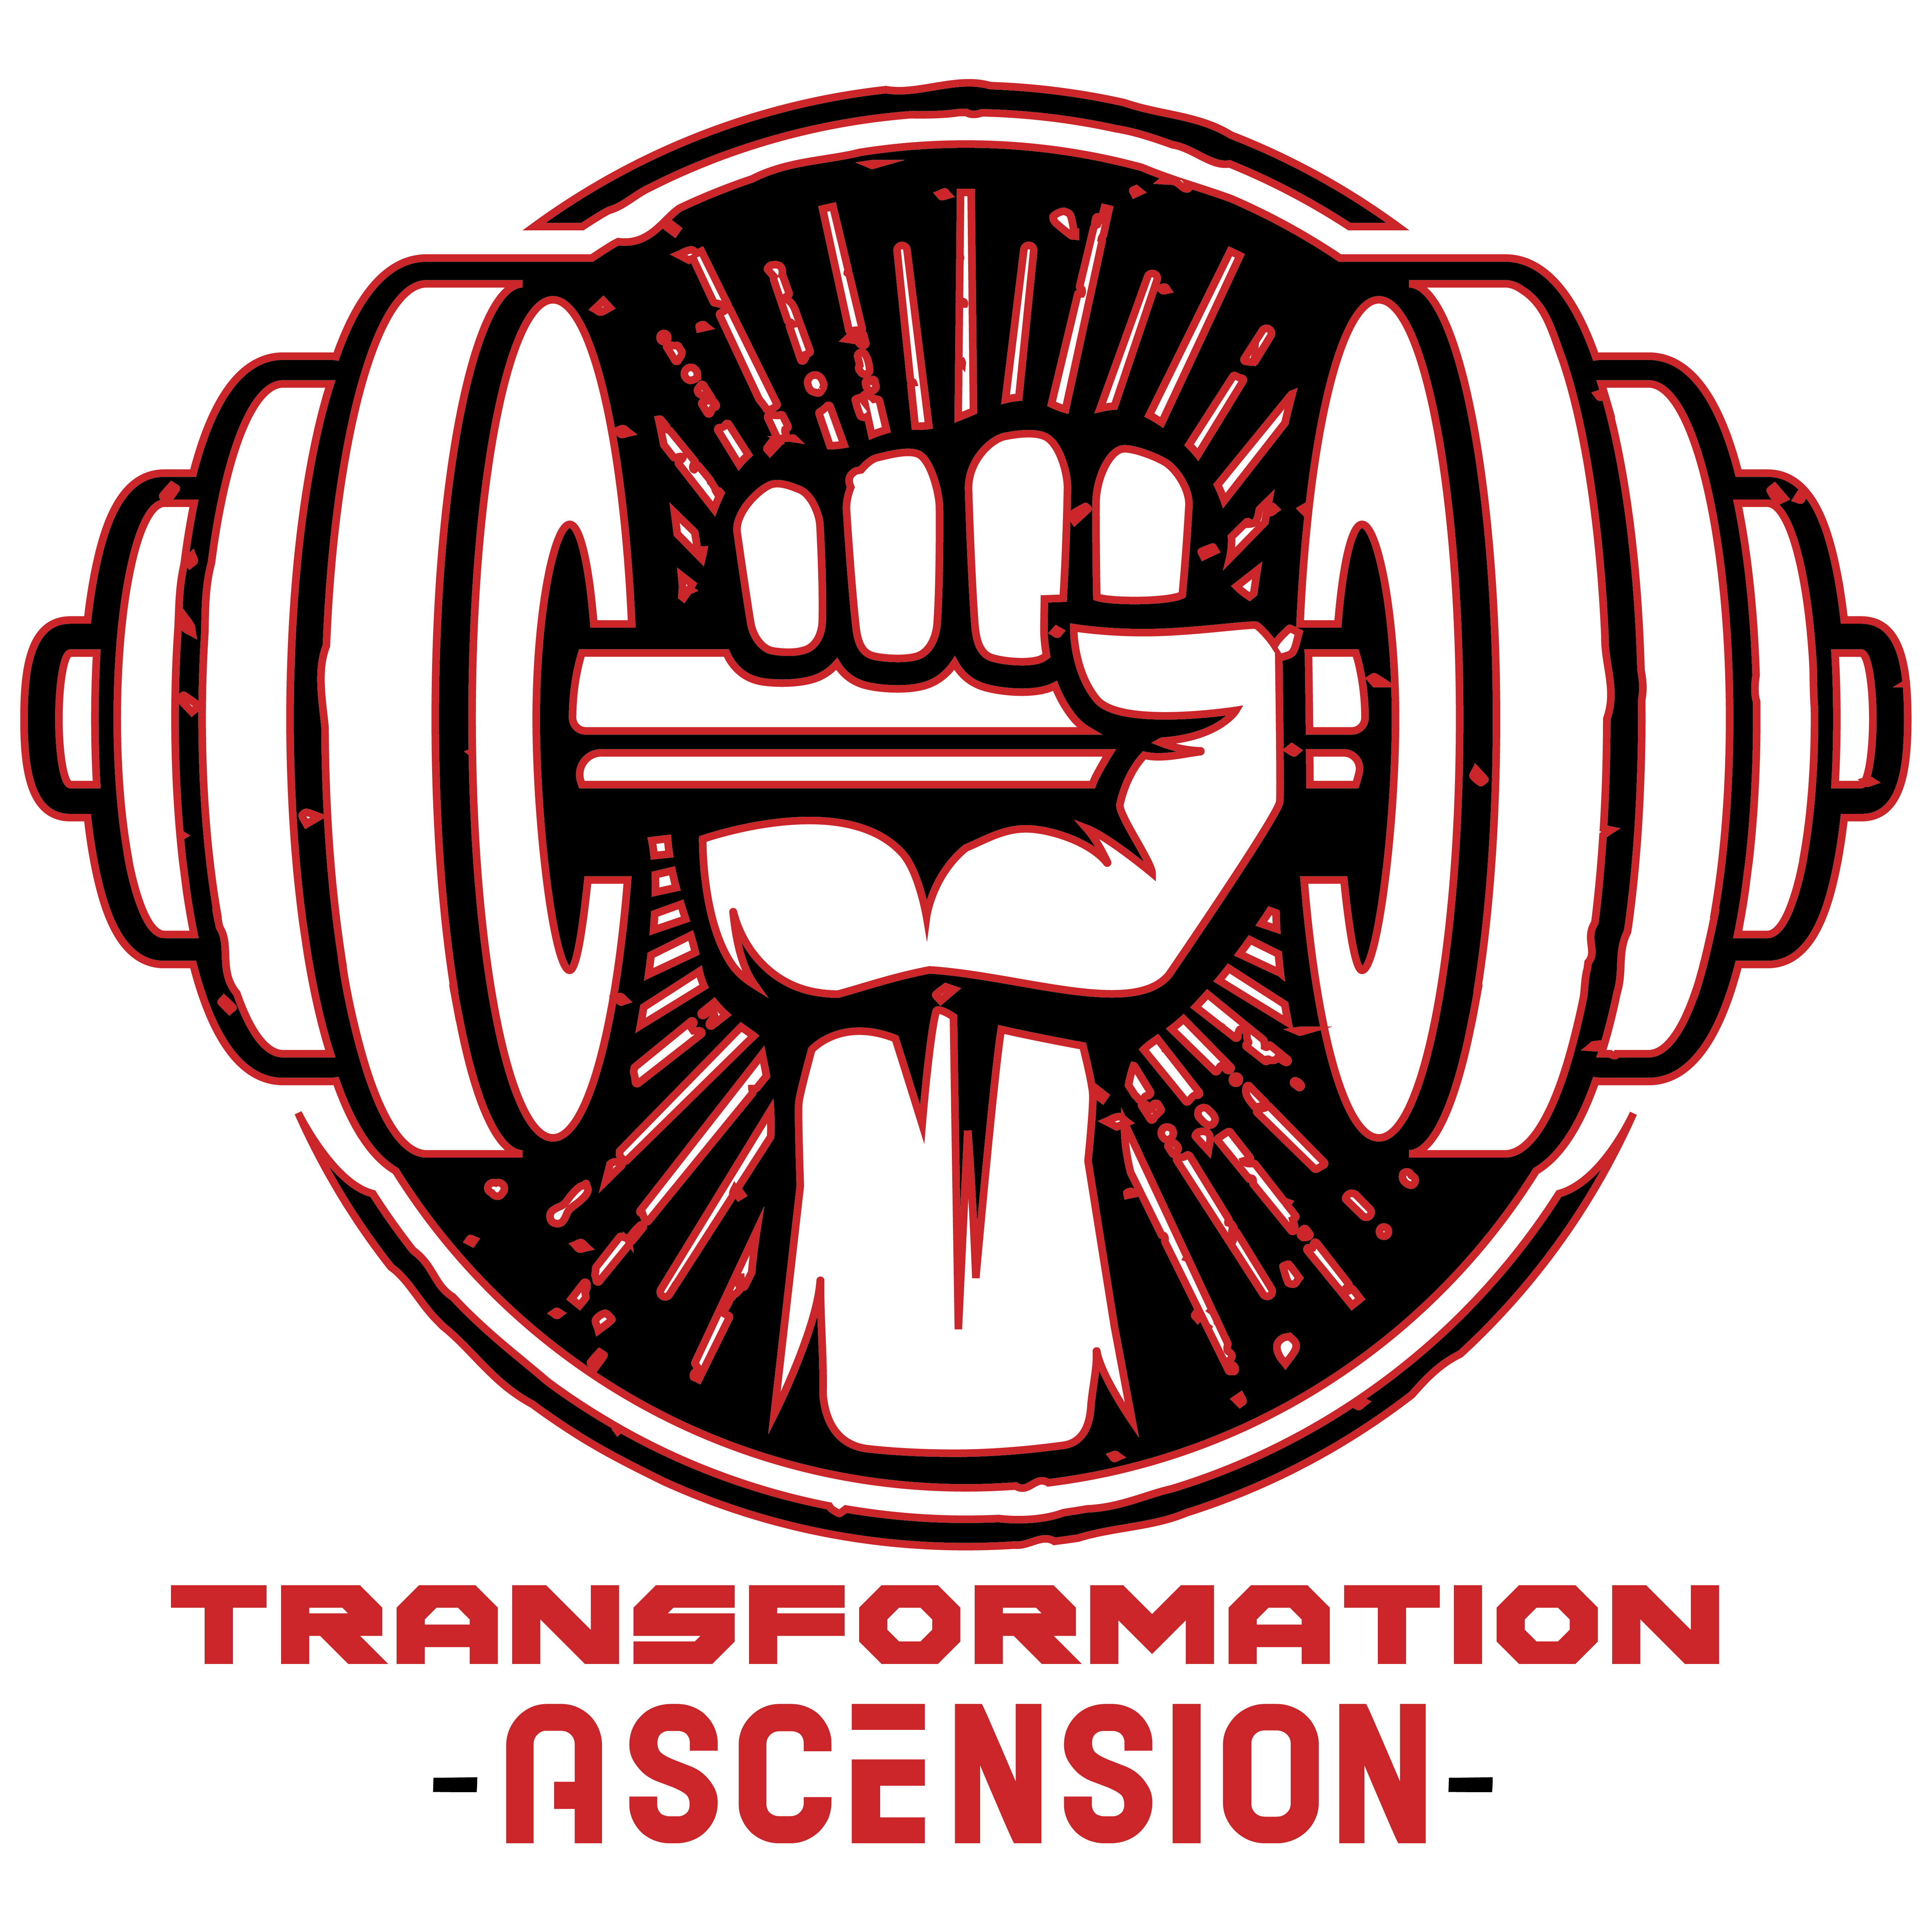 Transformation of Ascension